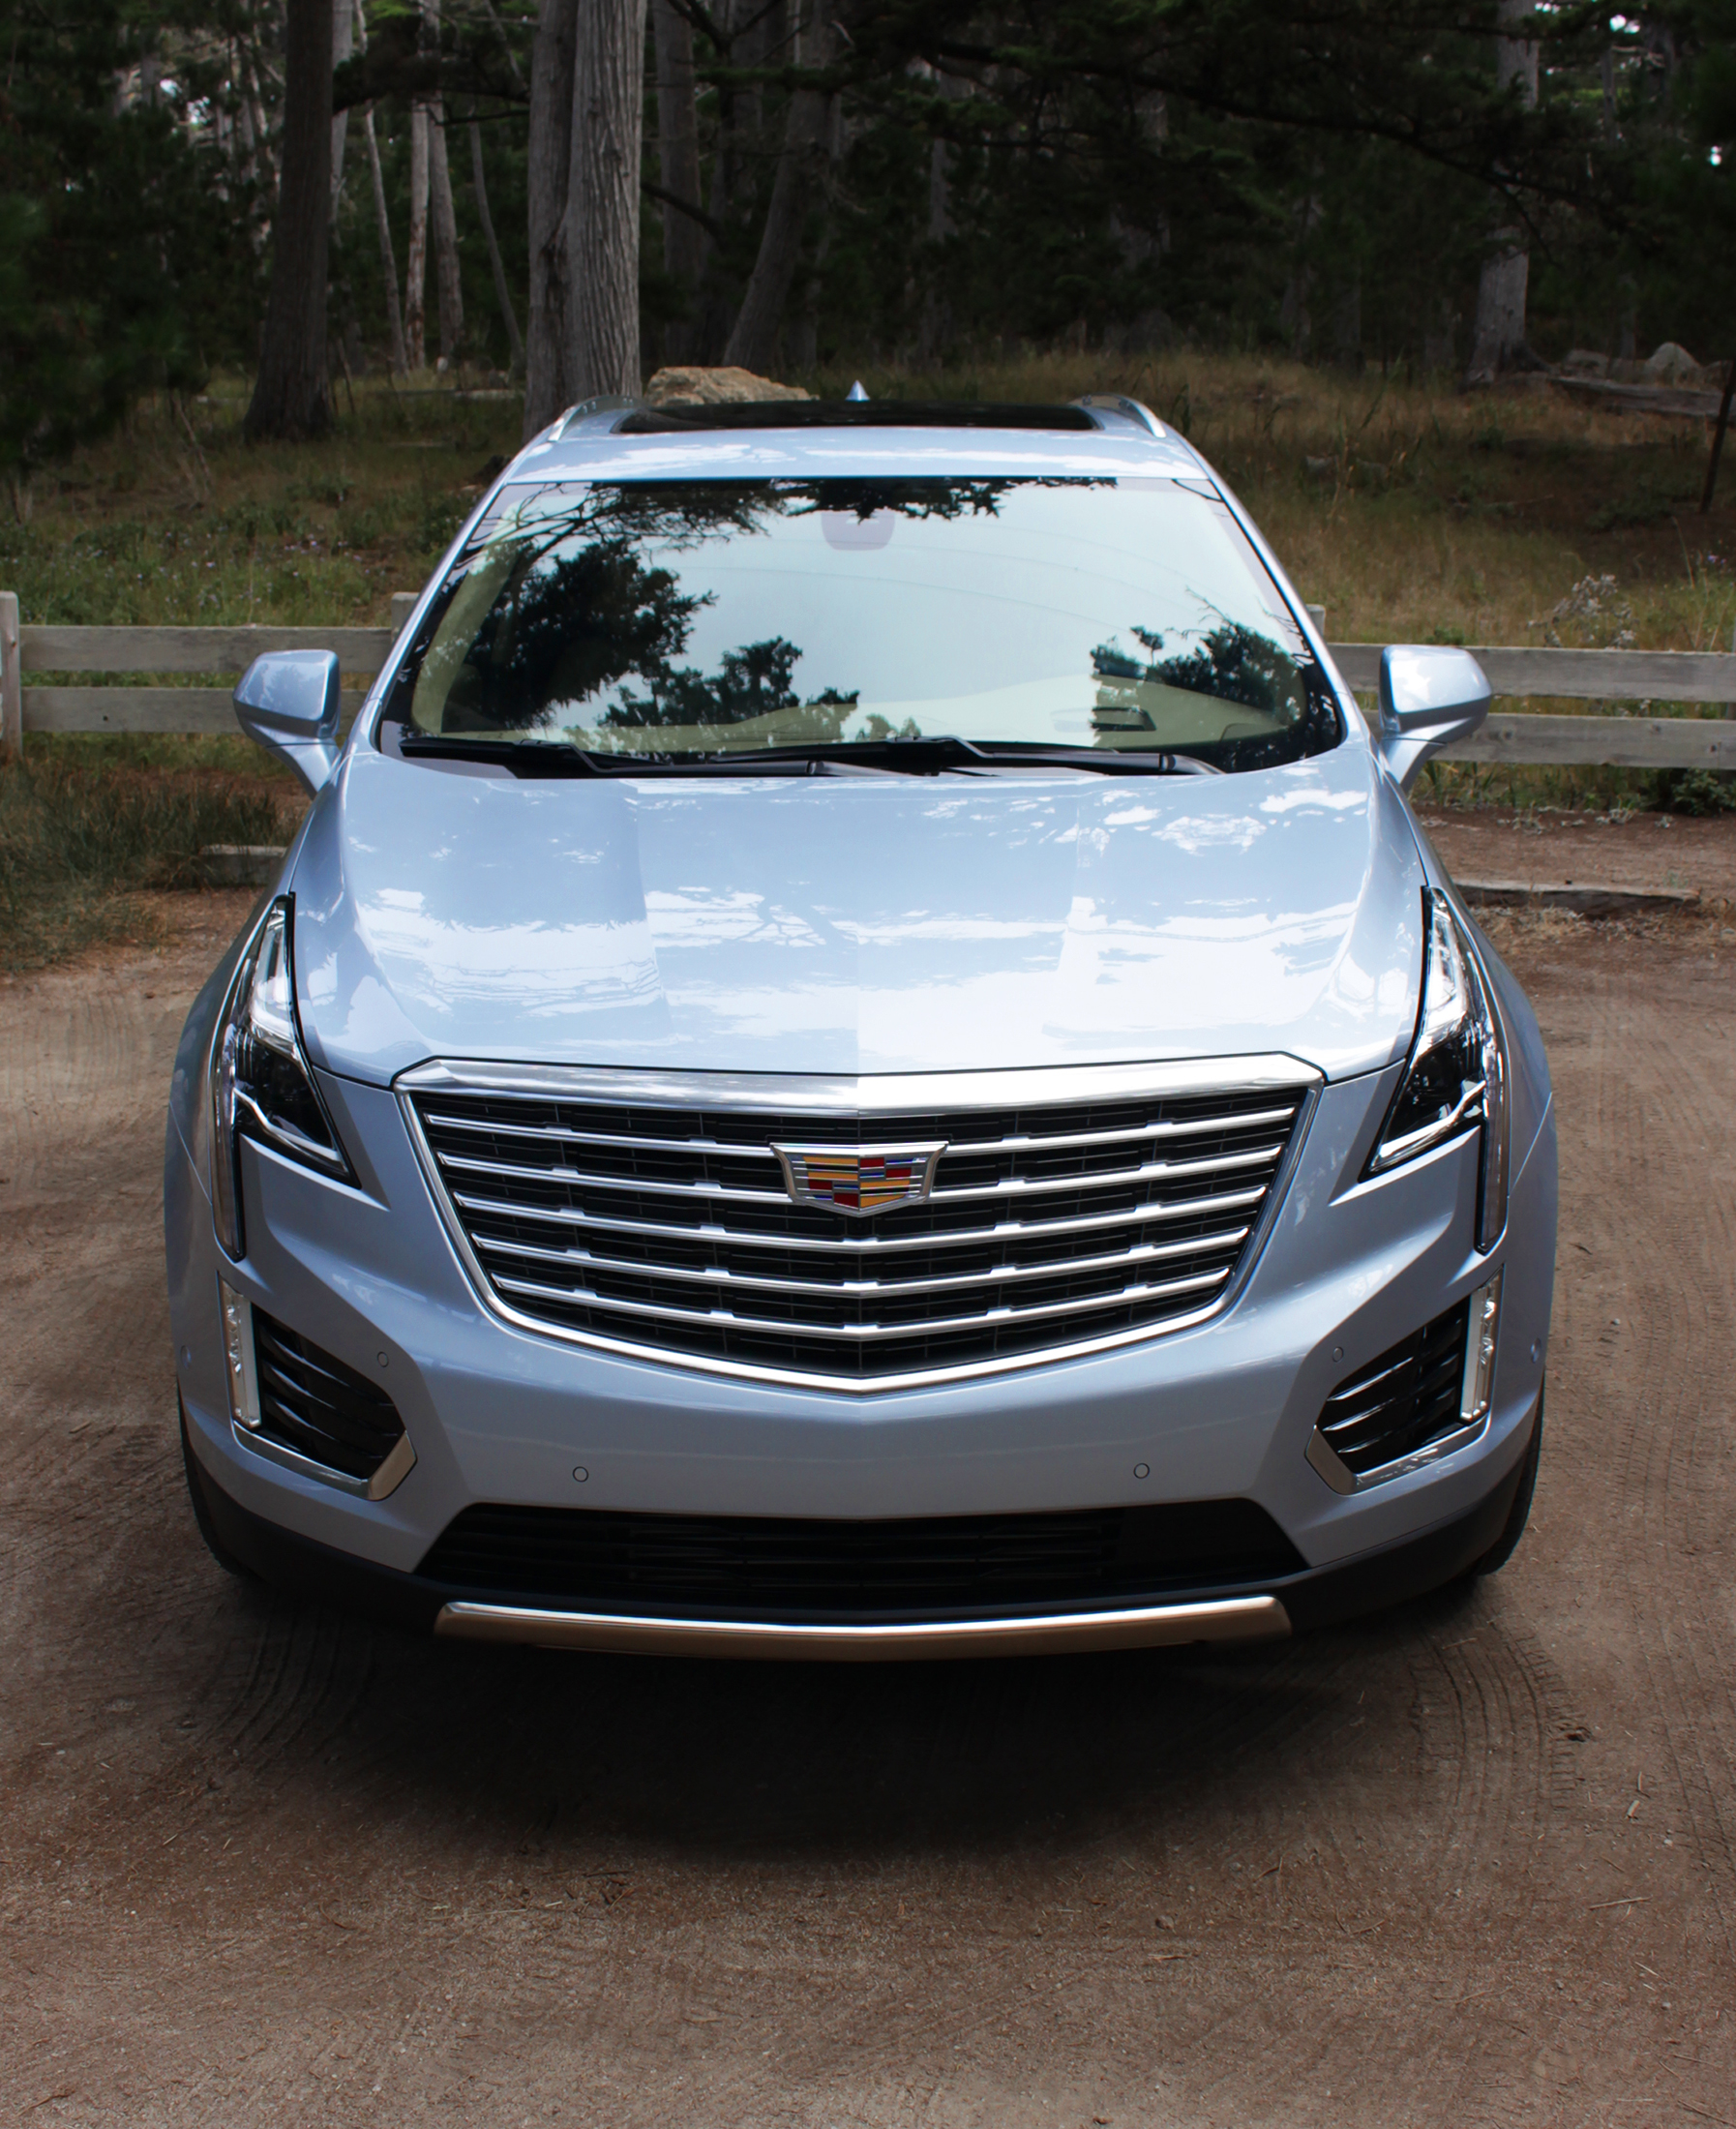 2017 Cadillac XT5: The Ultimate Crossover